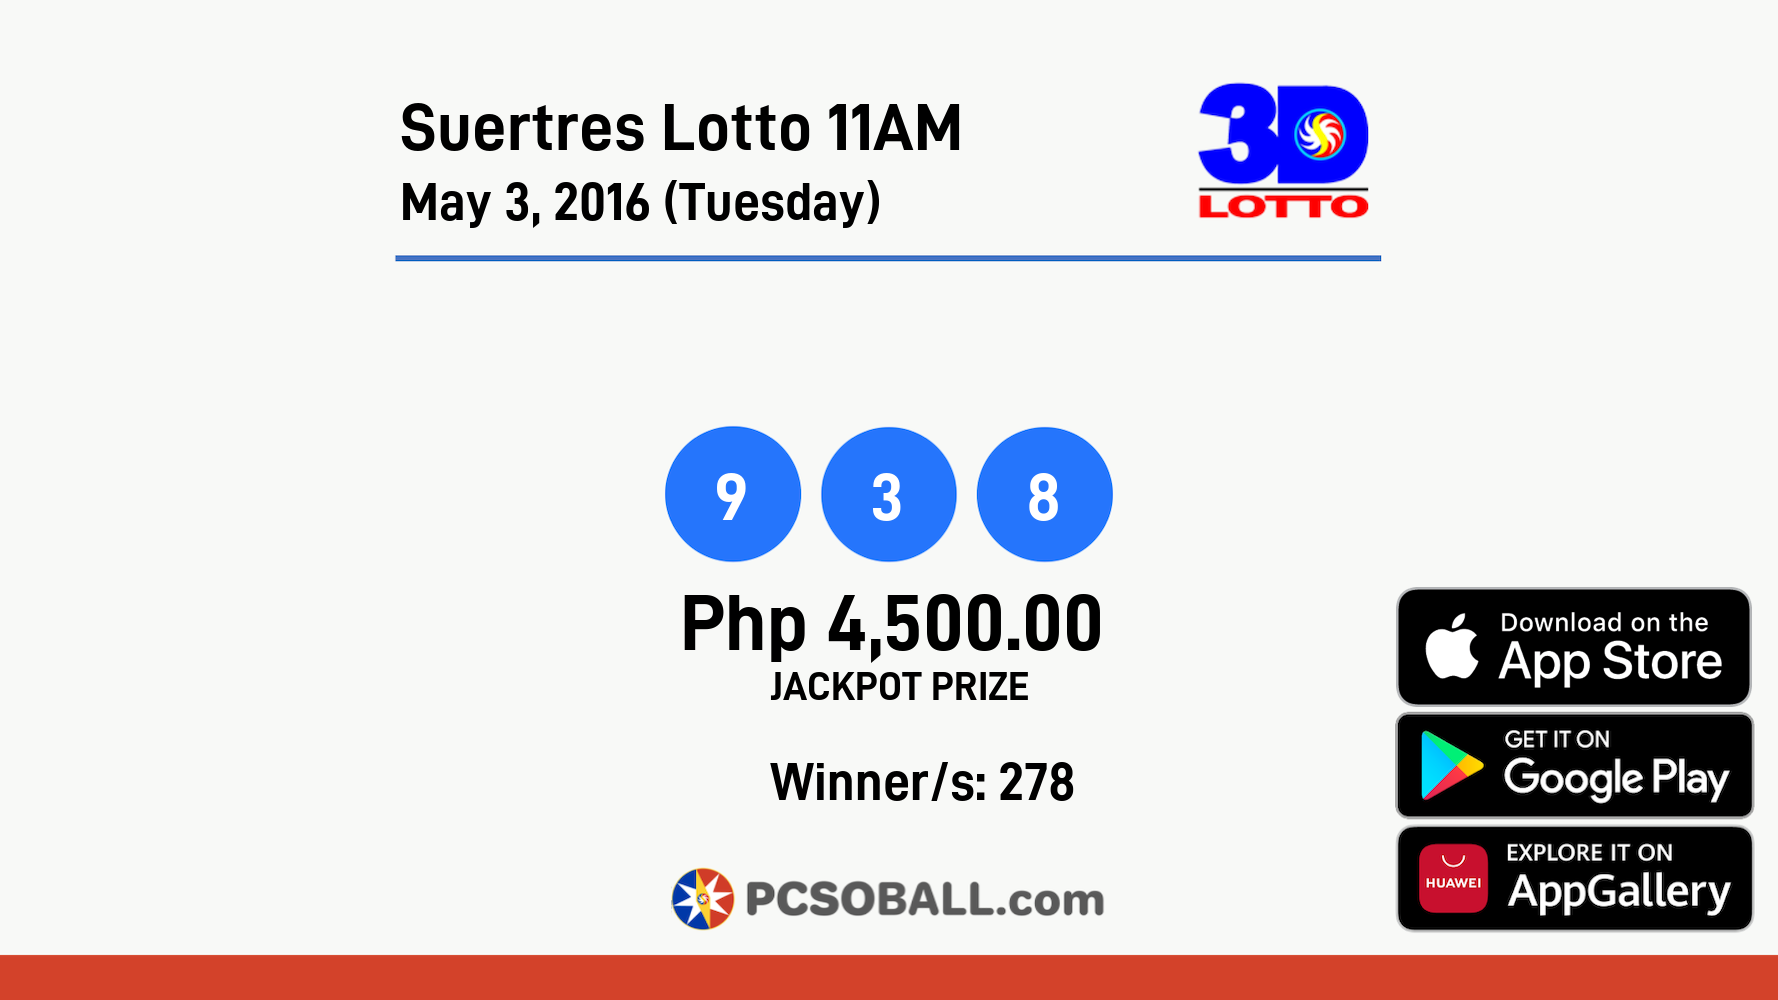 Suertres Lotto 11AM May 3, 2016 (Tuesday) Result